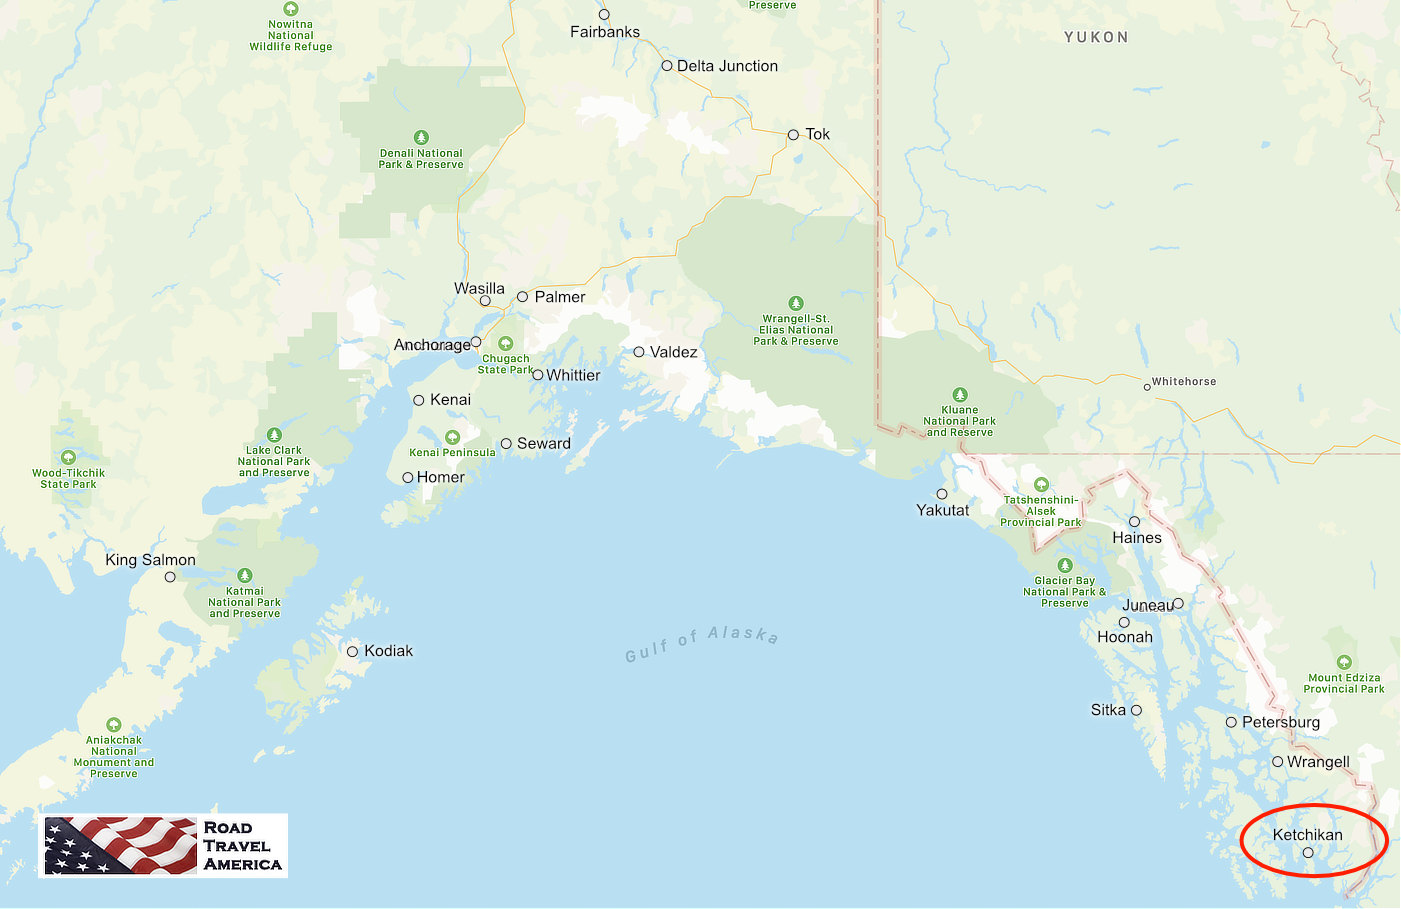 Map showing the location of Ketchikan relative to other Alaska cities, parks and preserves